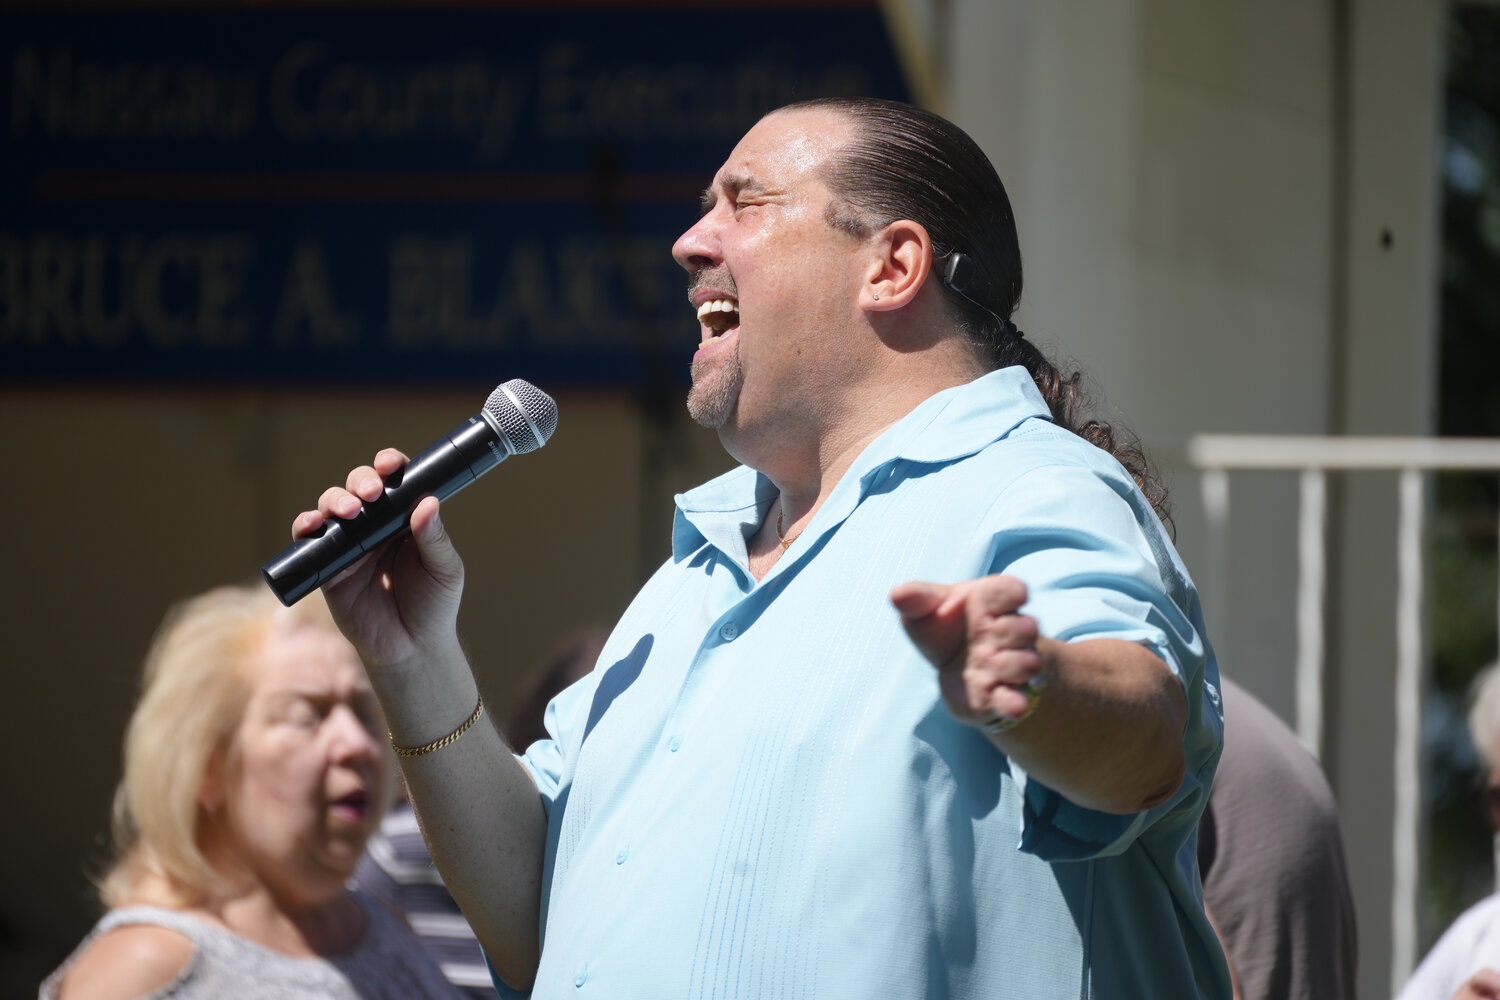 Michael D’Amore, lead singer of the doo wop group The Capris, stopped by Eisenhower Park for an afternoon performance on Aug. 31.